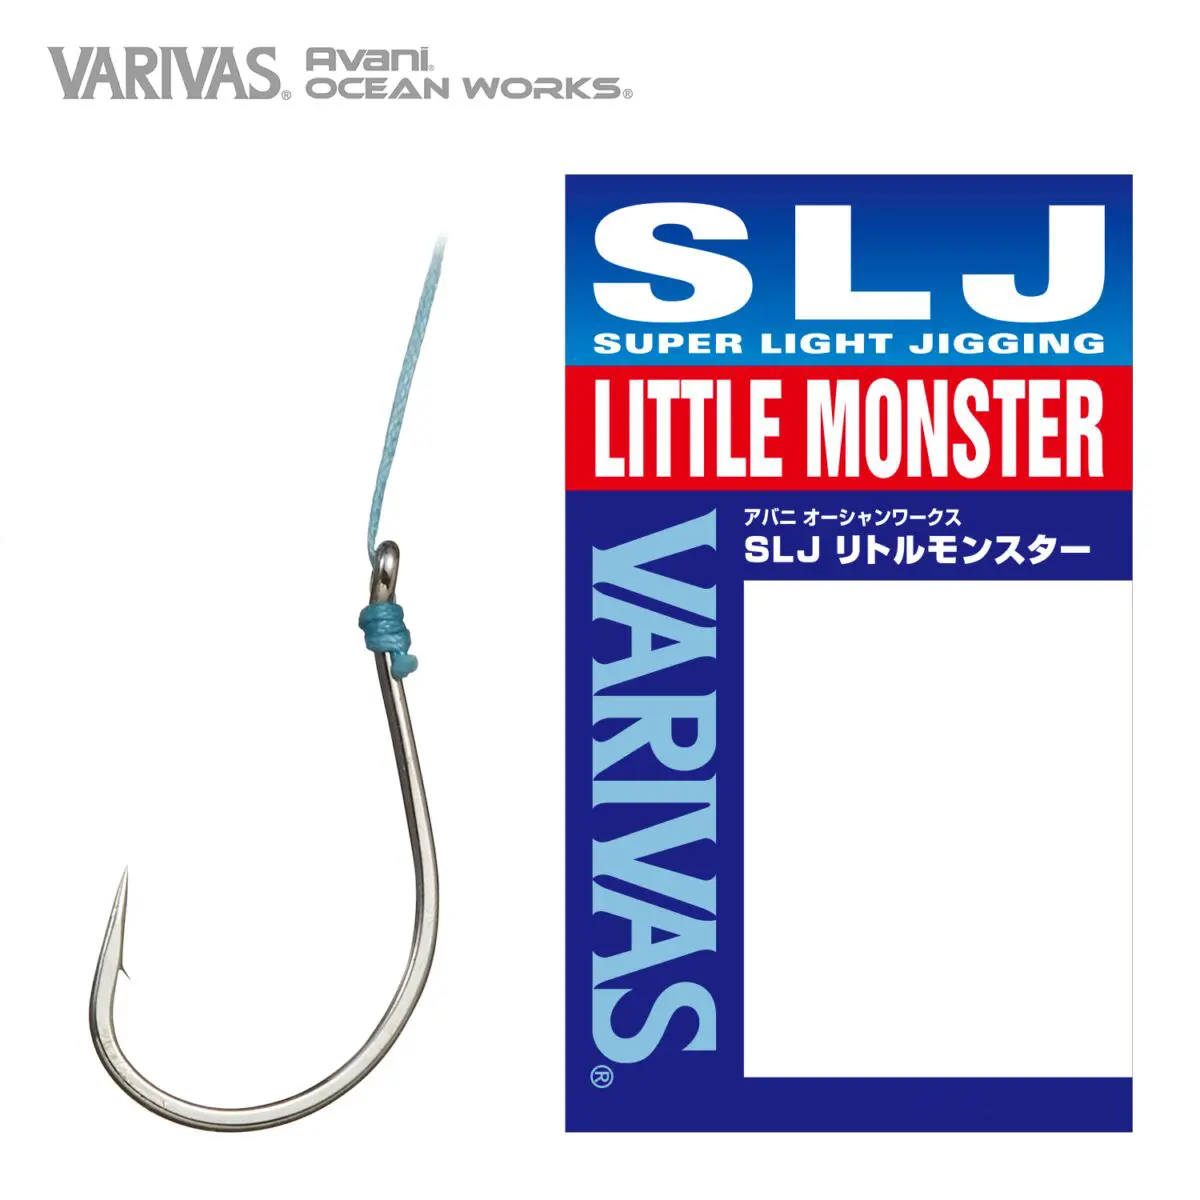 VARIVAS – Page 10 – Premier brand of high-performance fishing line and gear  for serious anglers.